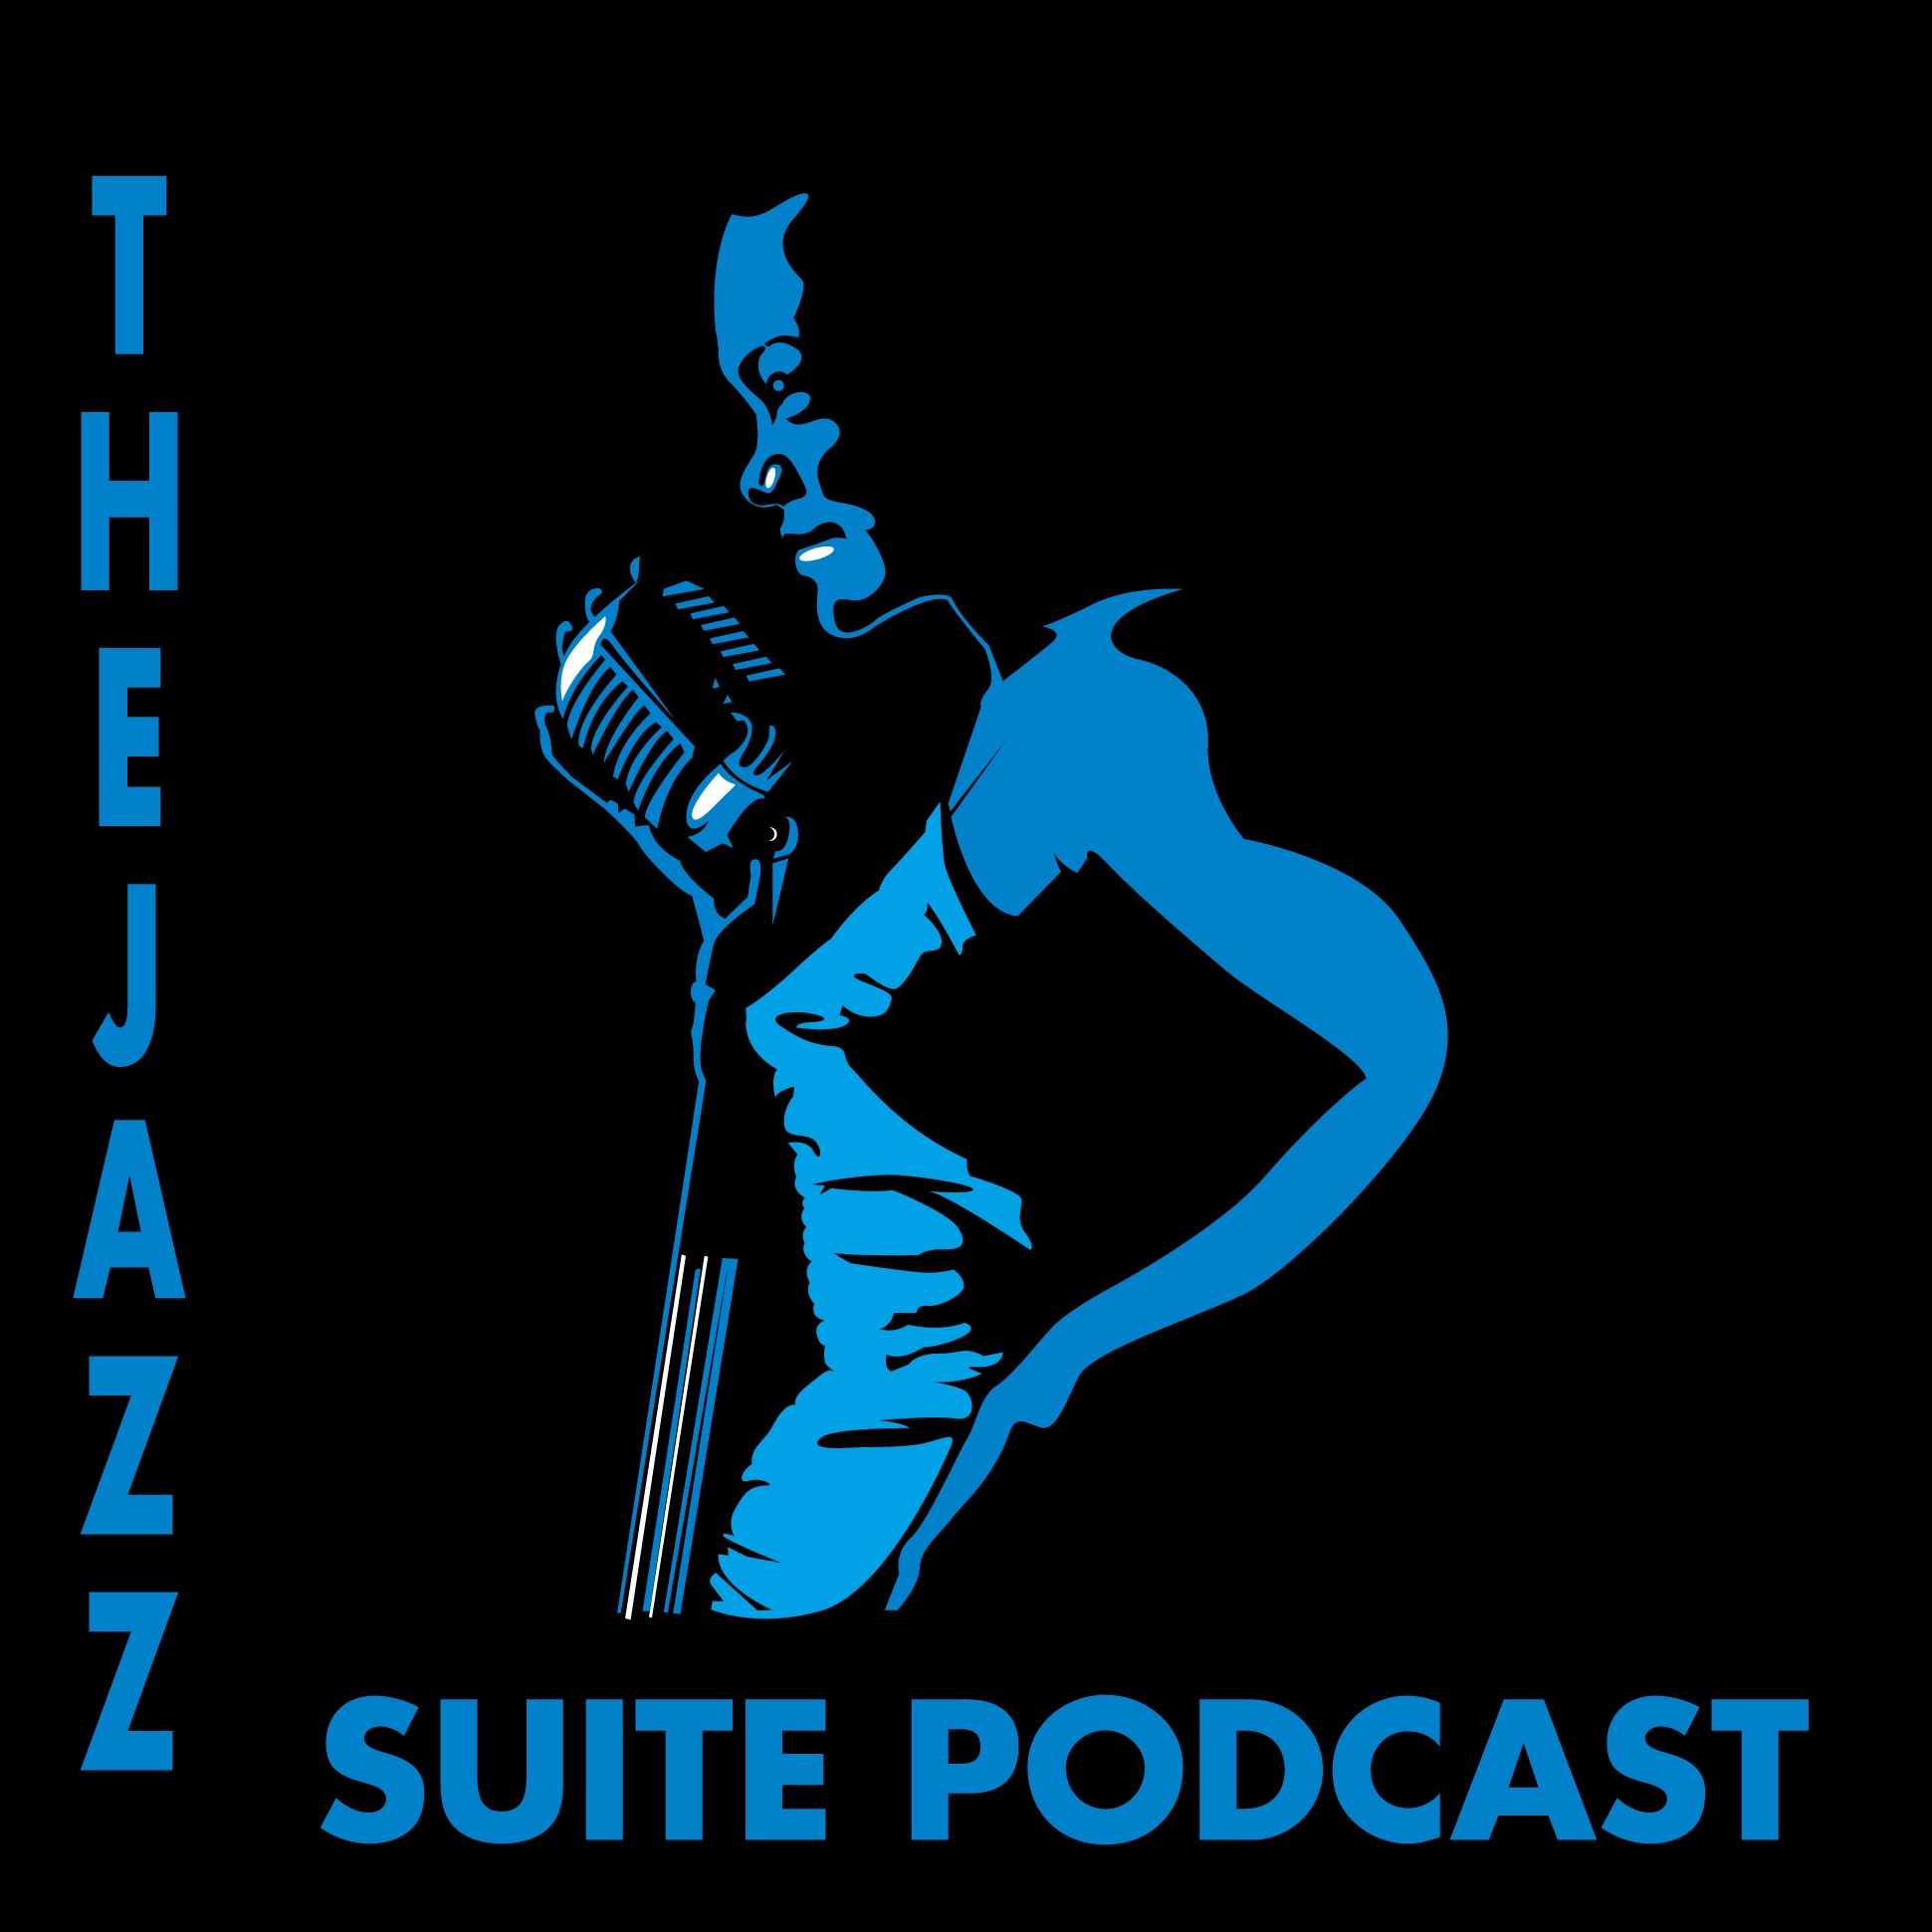 The Jazz Suite Podcast Show #464